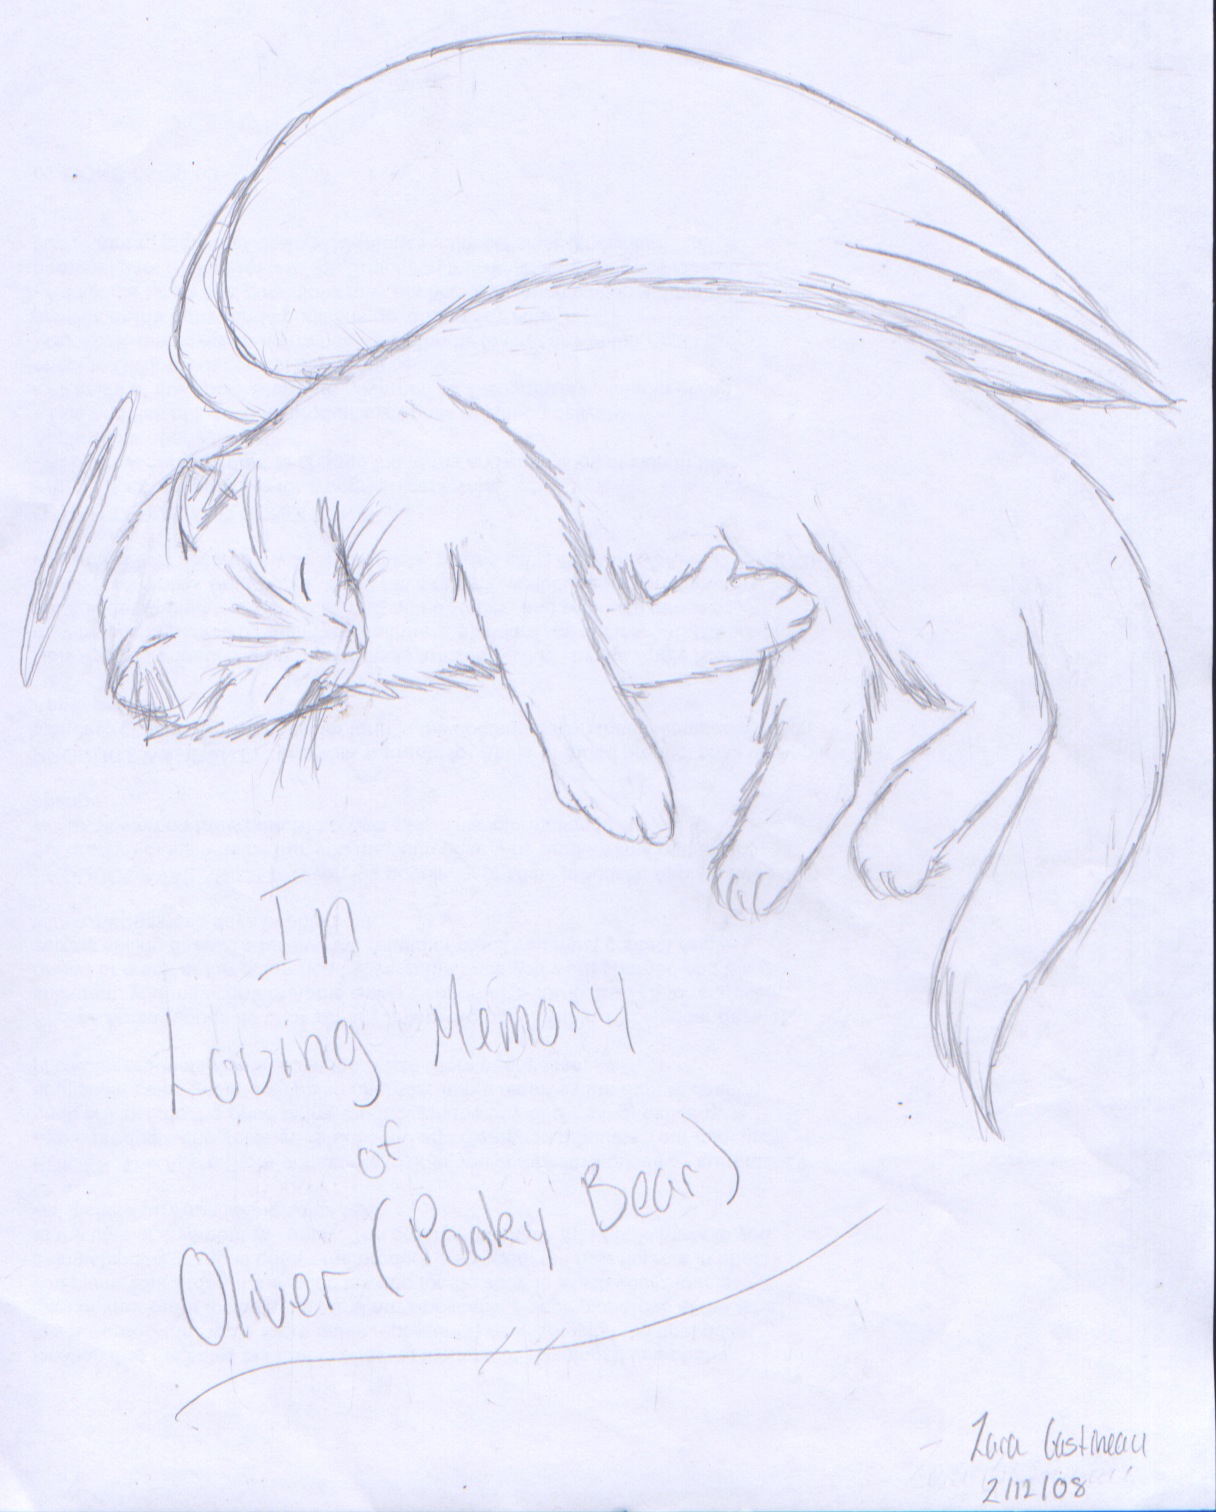 In Loving Memory of Oliver by Dementor